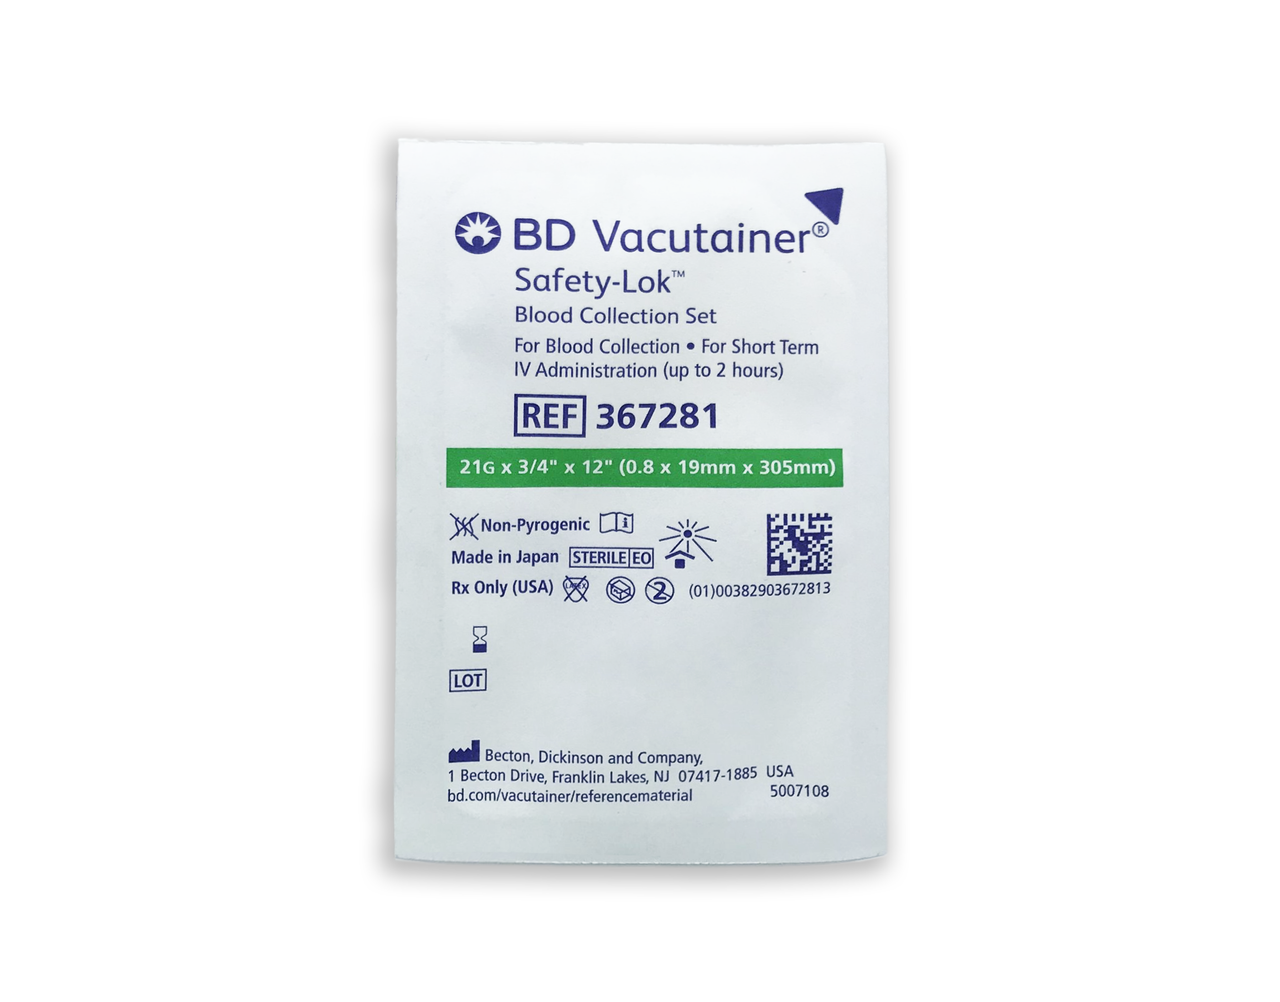 BD Vacutainer Safety-Lok 367281 Blood Collection Set - 21 G, 3/4'' Needle Length, Safety Needle, 12 Inch Tubing, Sterile - 50 Sets